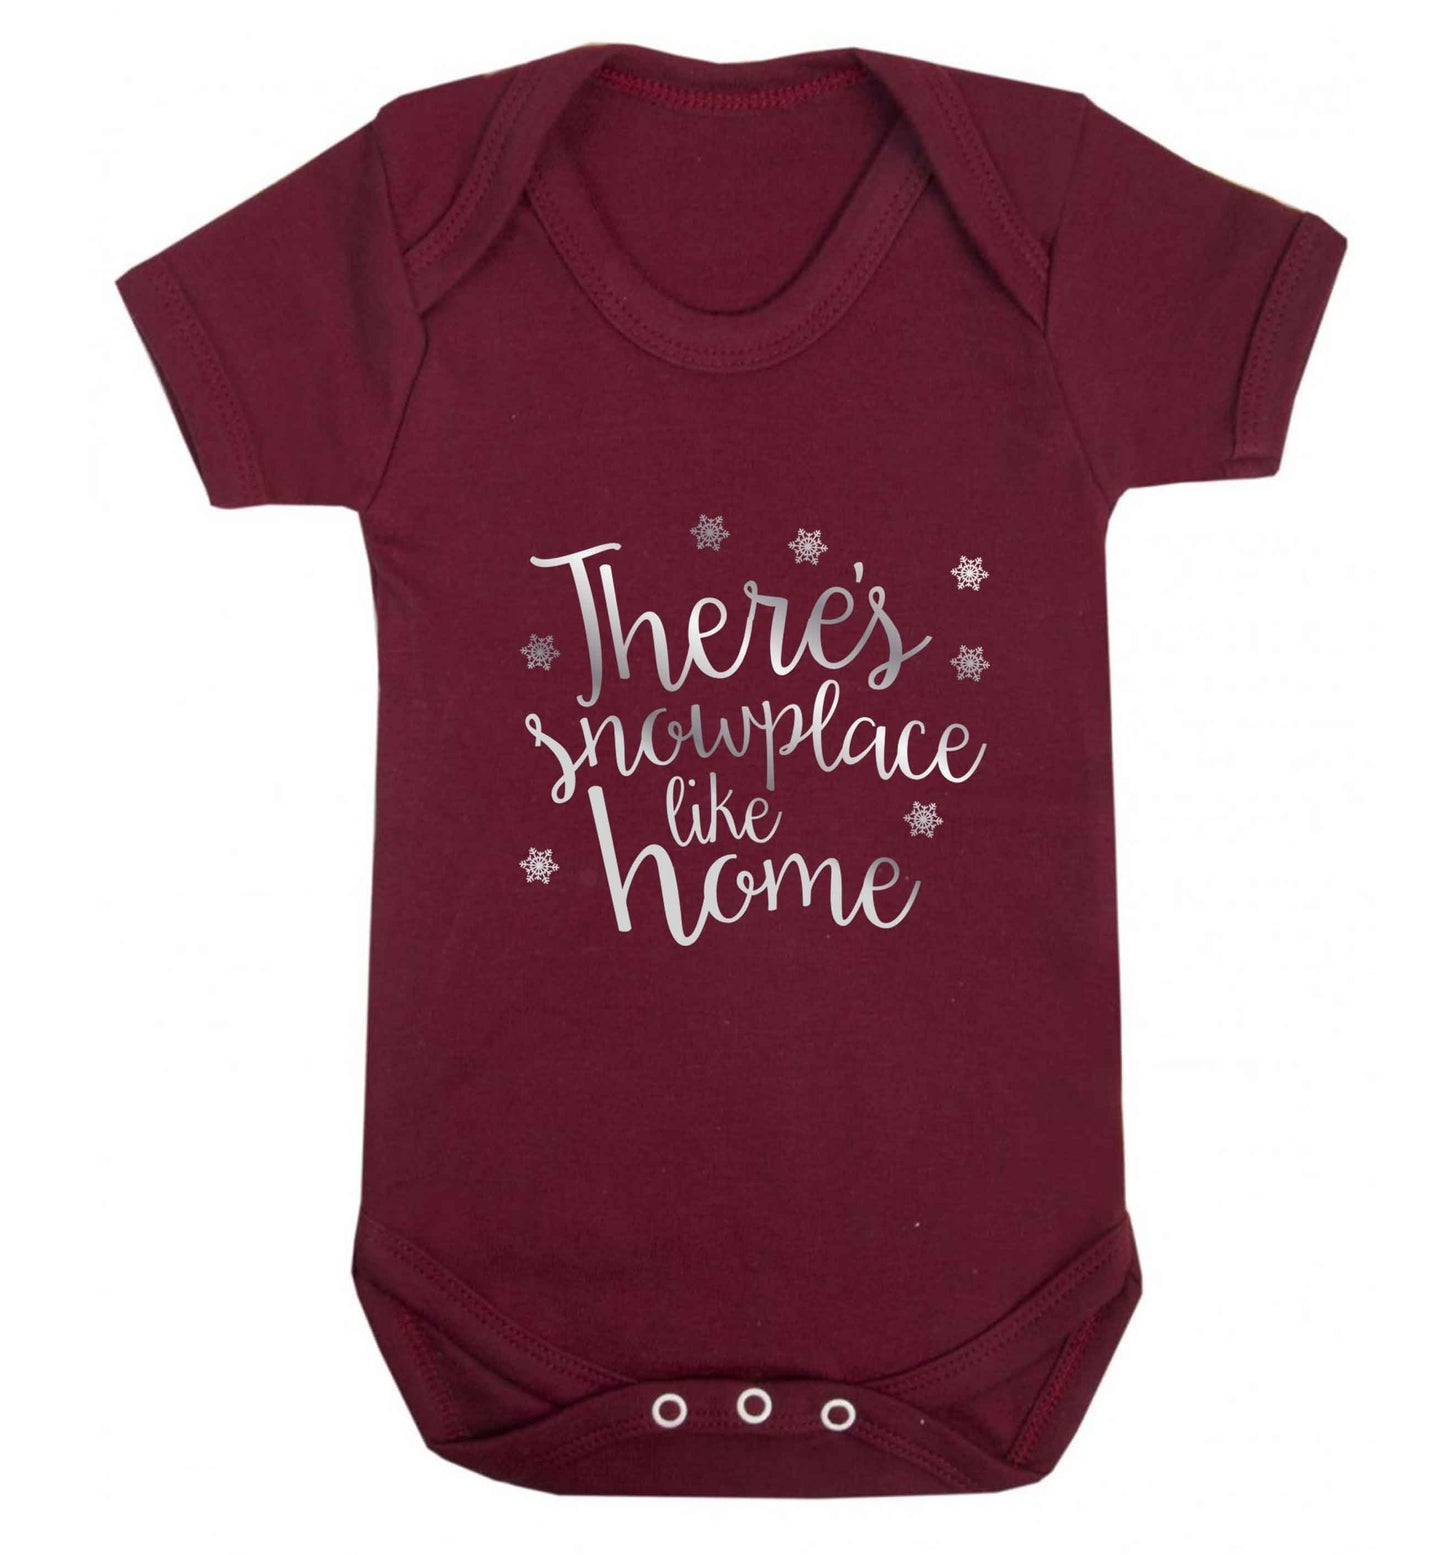 There's snowplace like home - metallic silver baby vest maroon 18-24 months